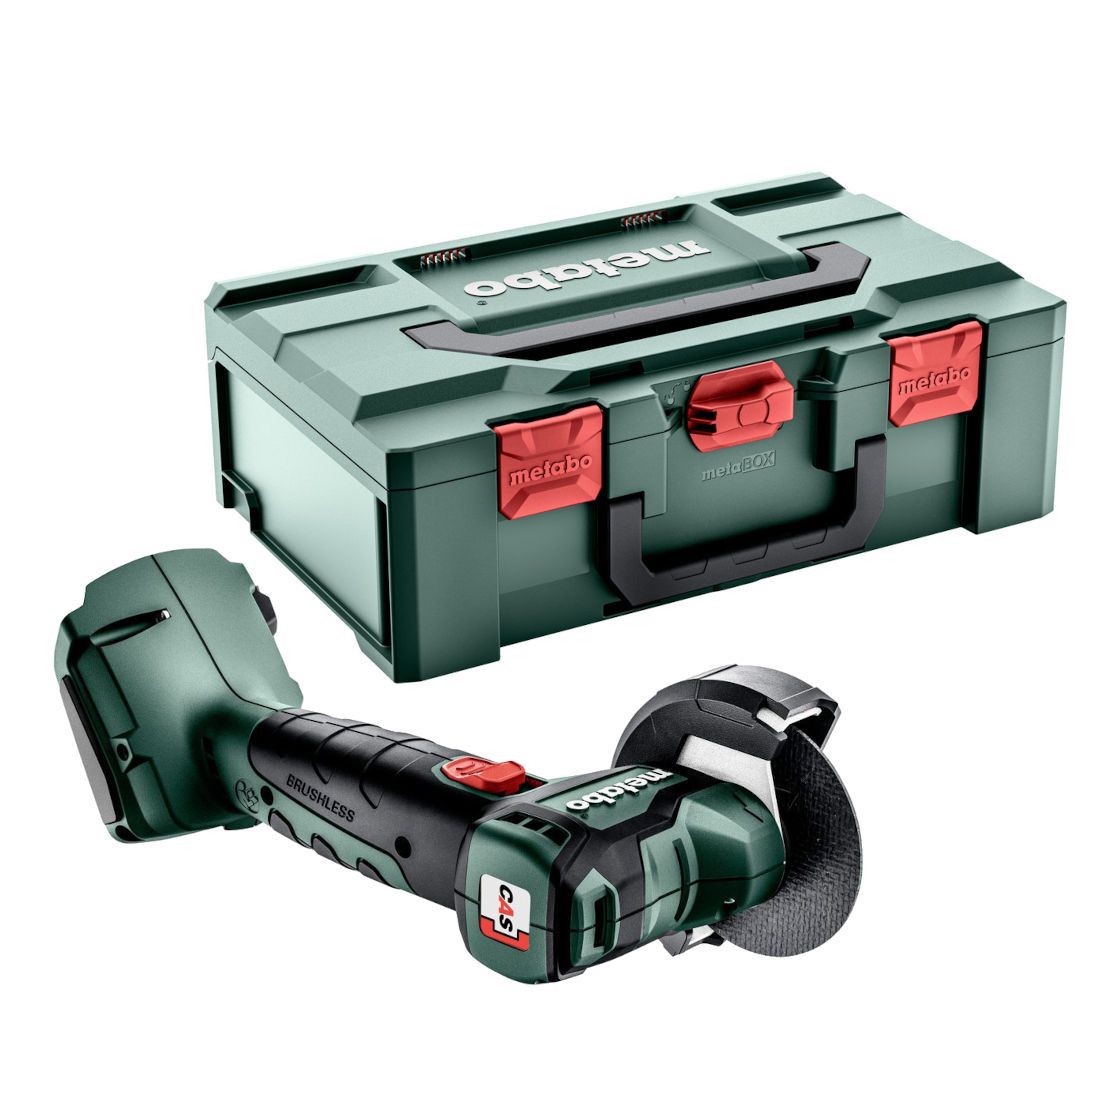 Metabo Cordless Angle Grinder 76mm CC 18 LTX BL 18V Body Only in MetaBOX Case